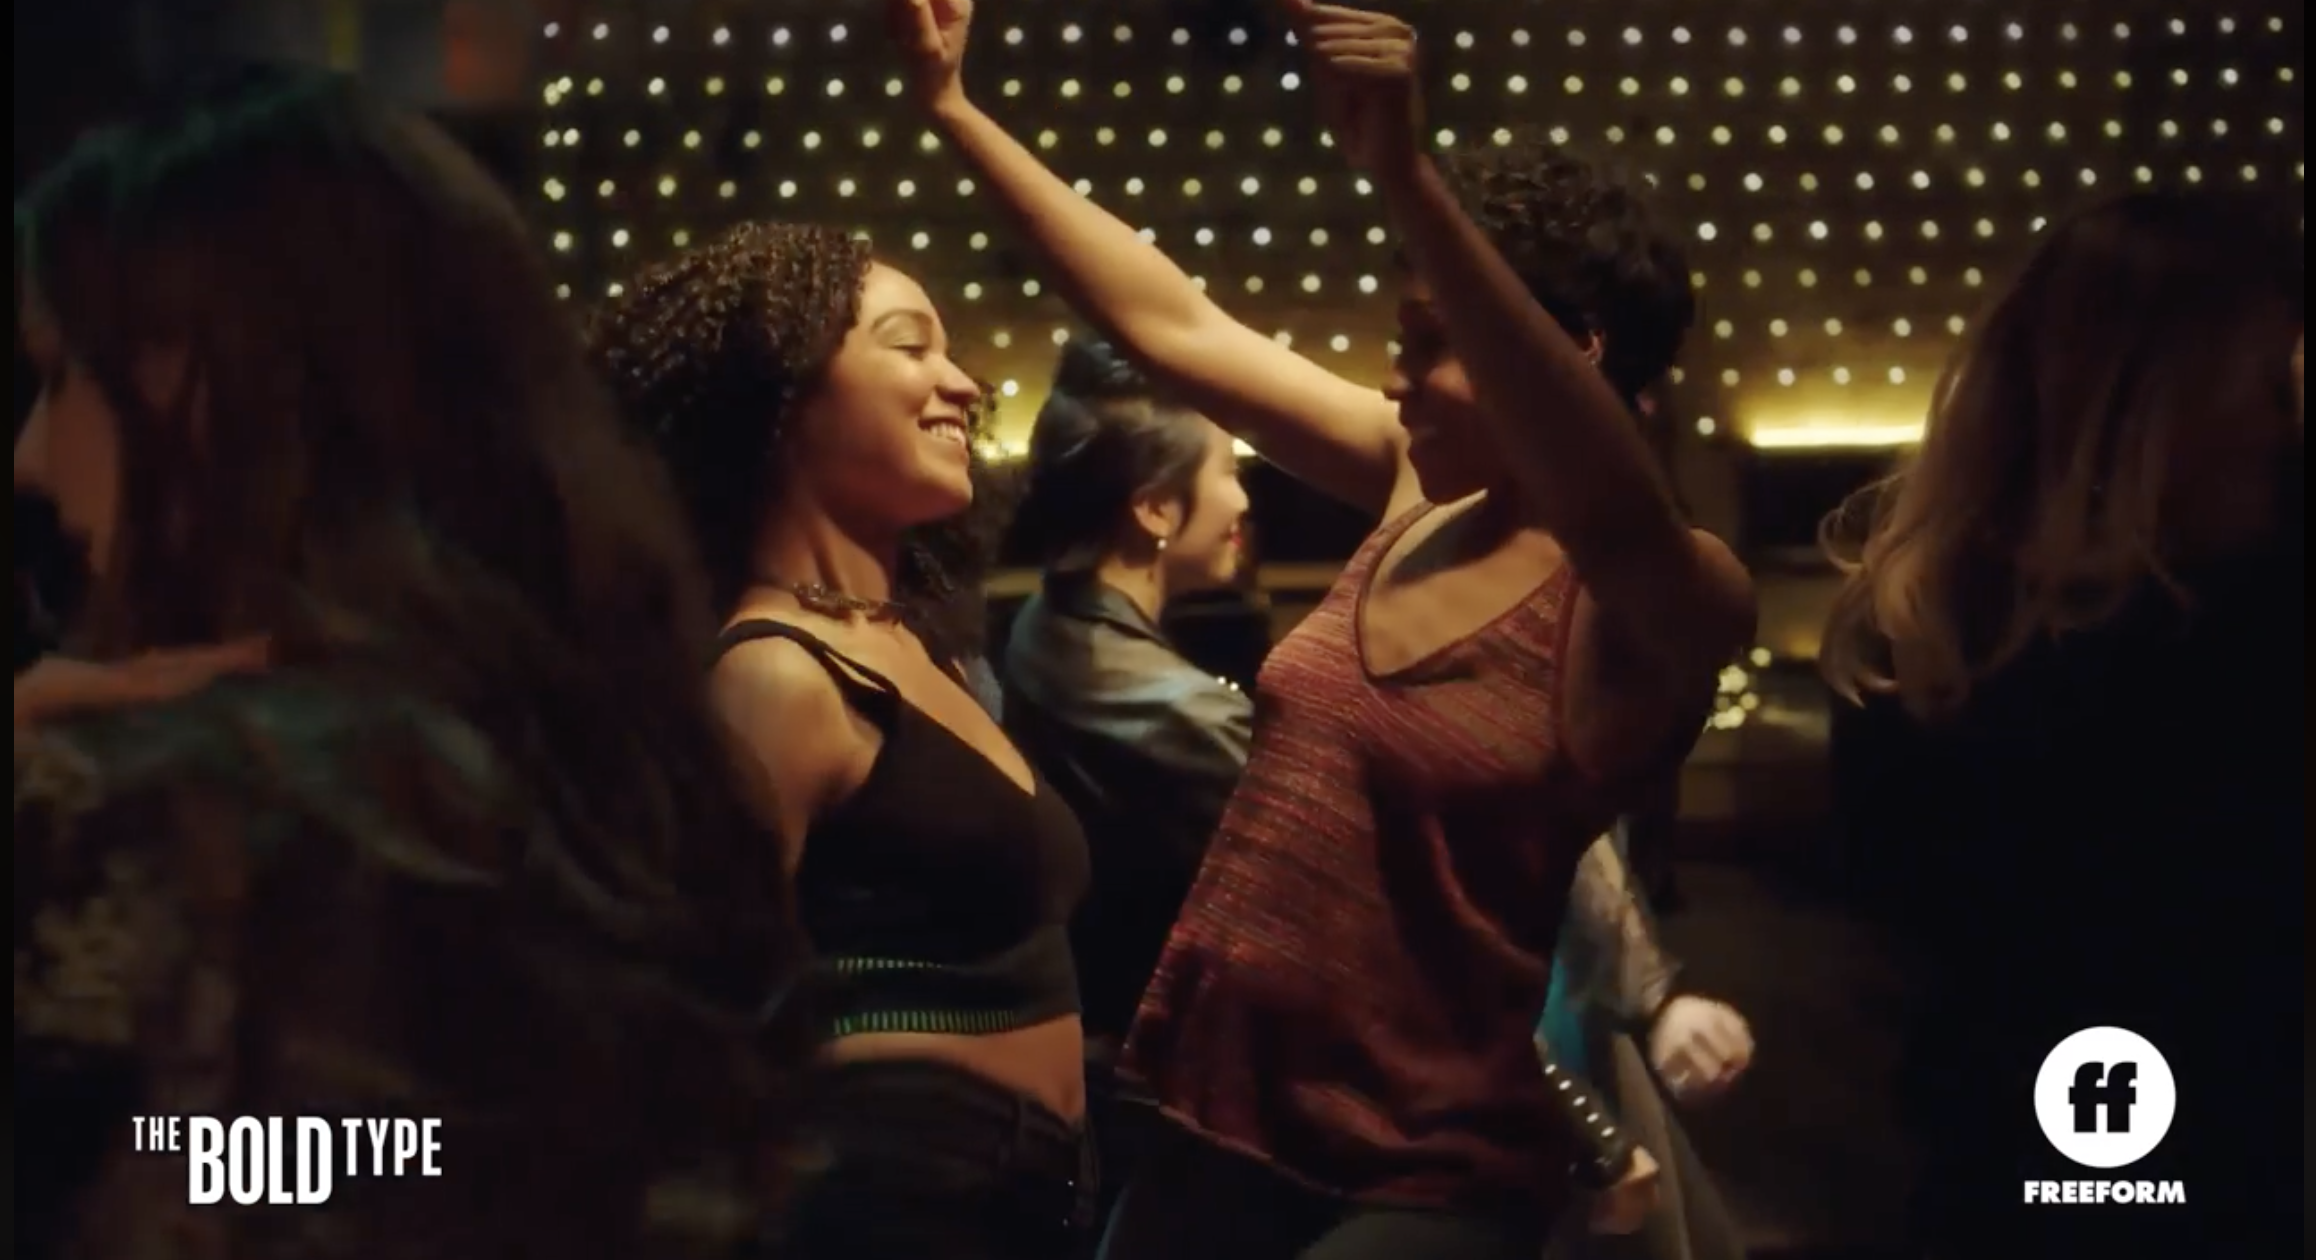 Aisha Dee as Kat Edison dances with a woman in a gay bar in &quot;The Bold Type&quot;